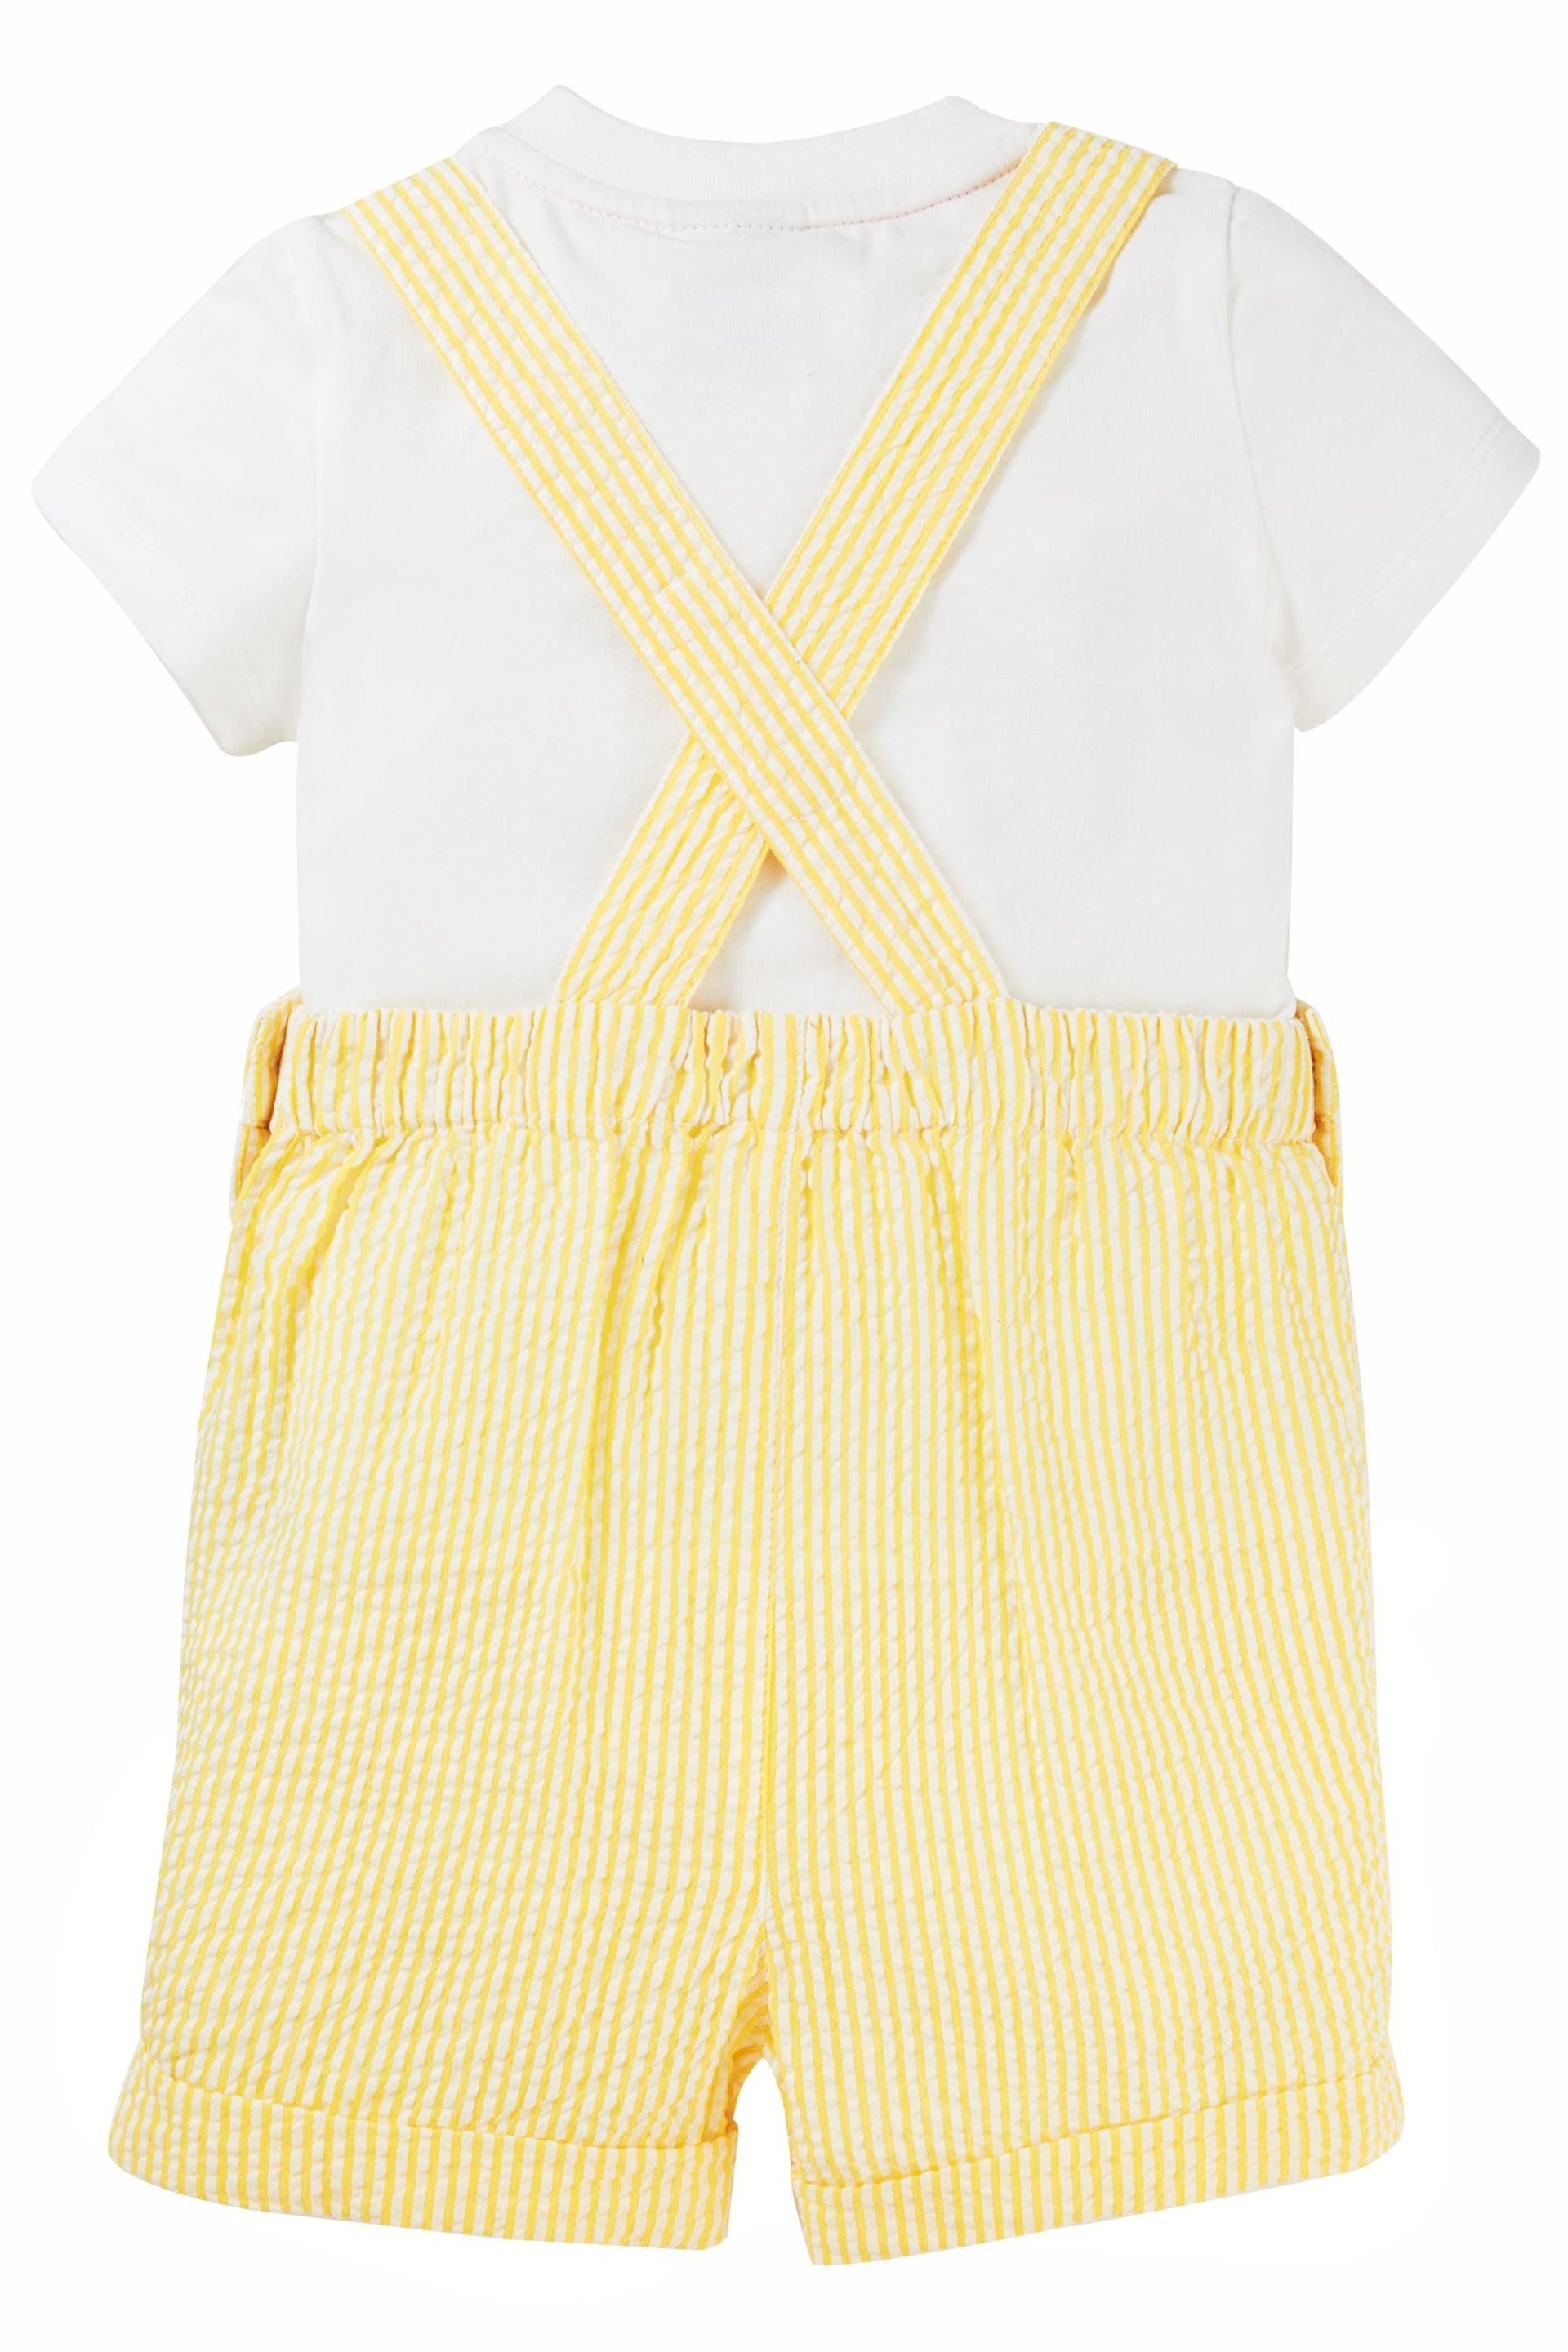 Frugi Yellow Seersucker Easter Duck T-Shirt And Short Dungaree Outfit Set - Image 3 of 6